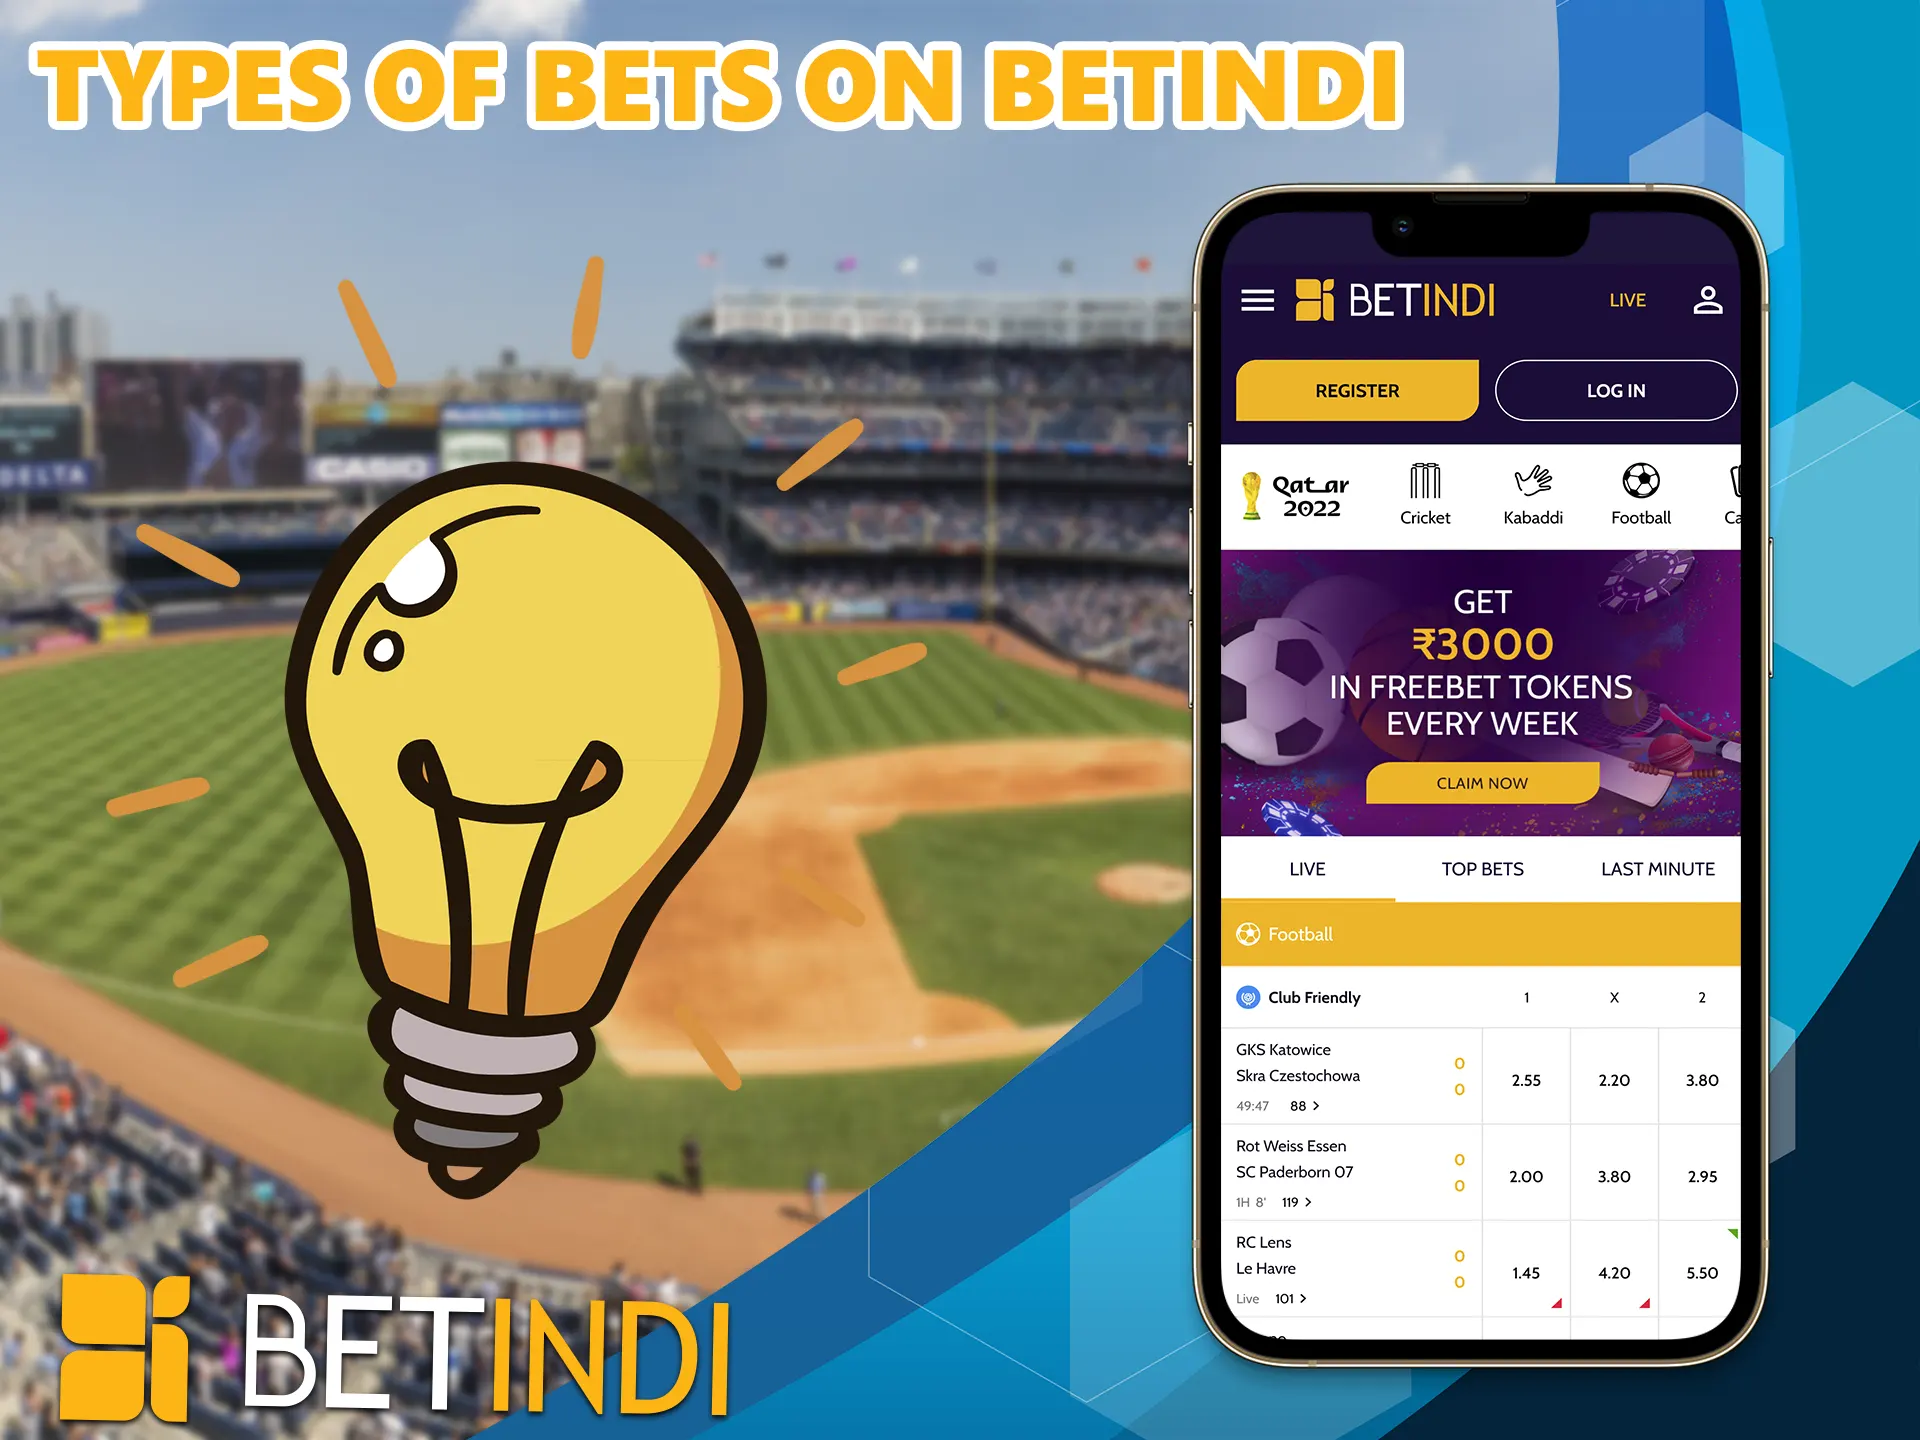 A wide range of outcomes in almost any event awaits you in the BetIndi mobile app.